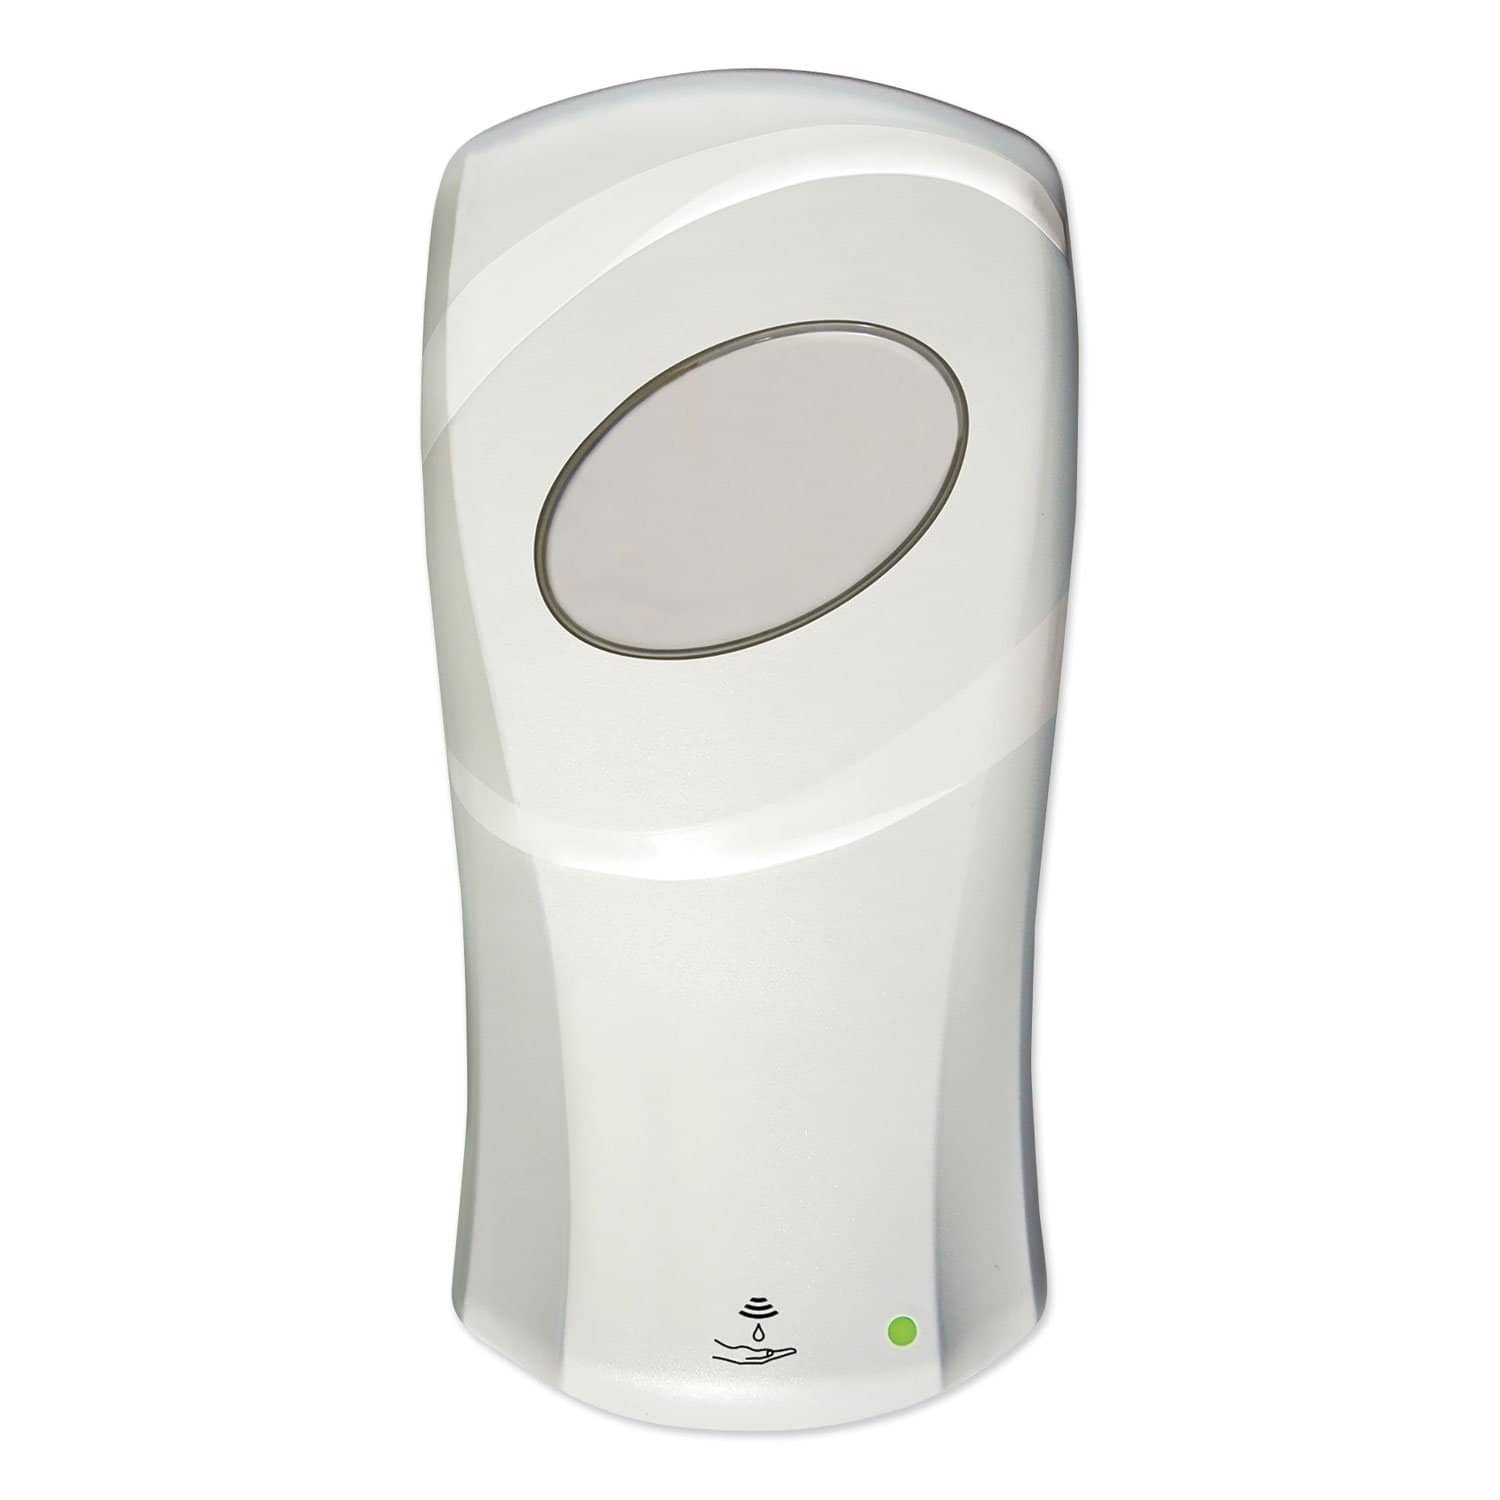 Dial Fit Touch Free Automatic Soap Dispenser, Foam, White, Includes 2PK Antibacterial Refills - TotalRestroom.com